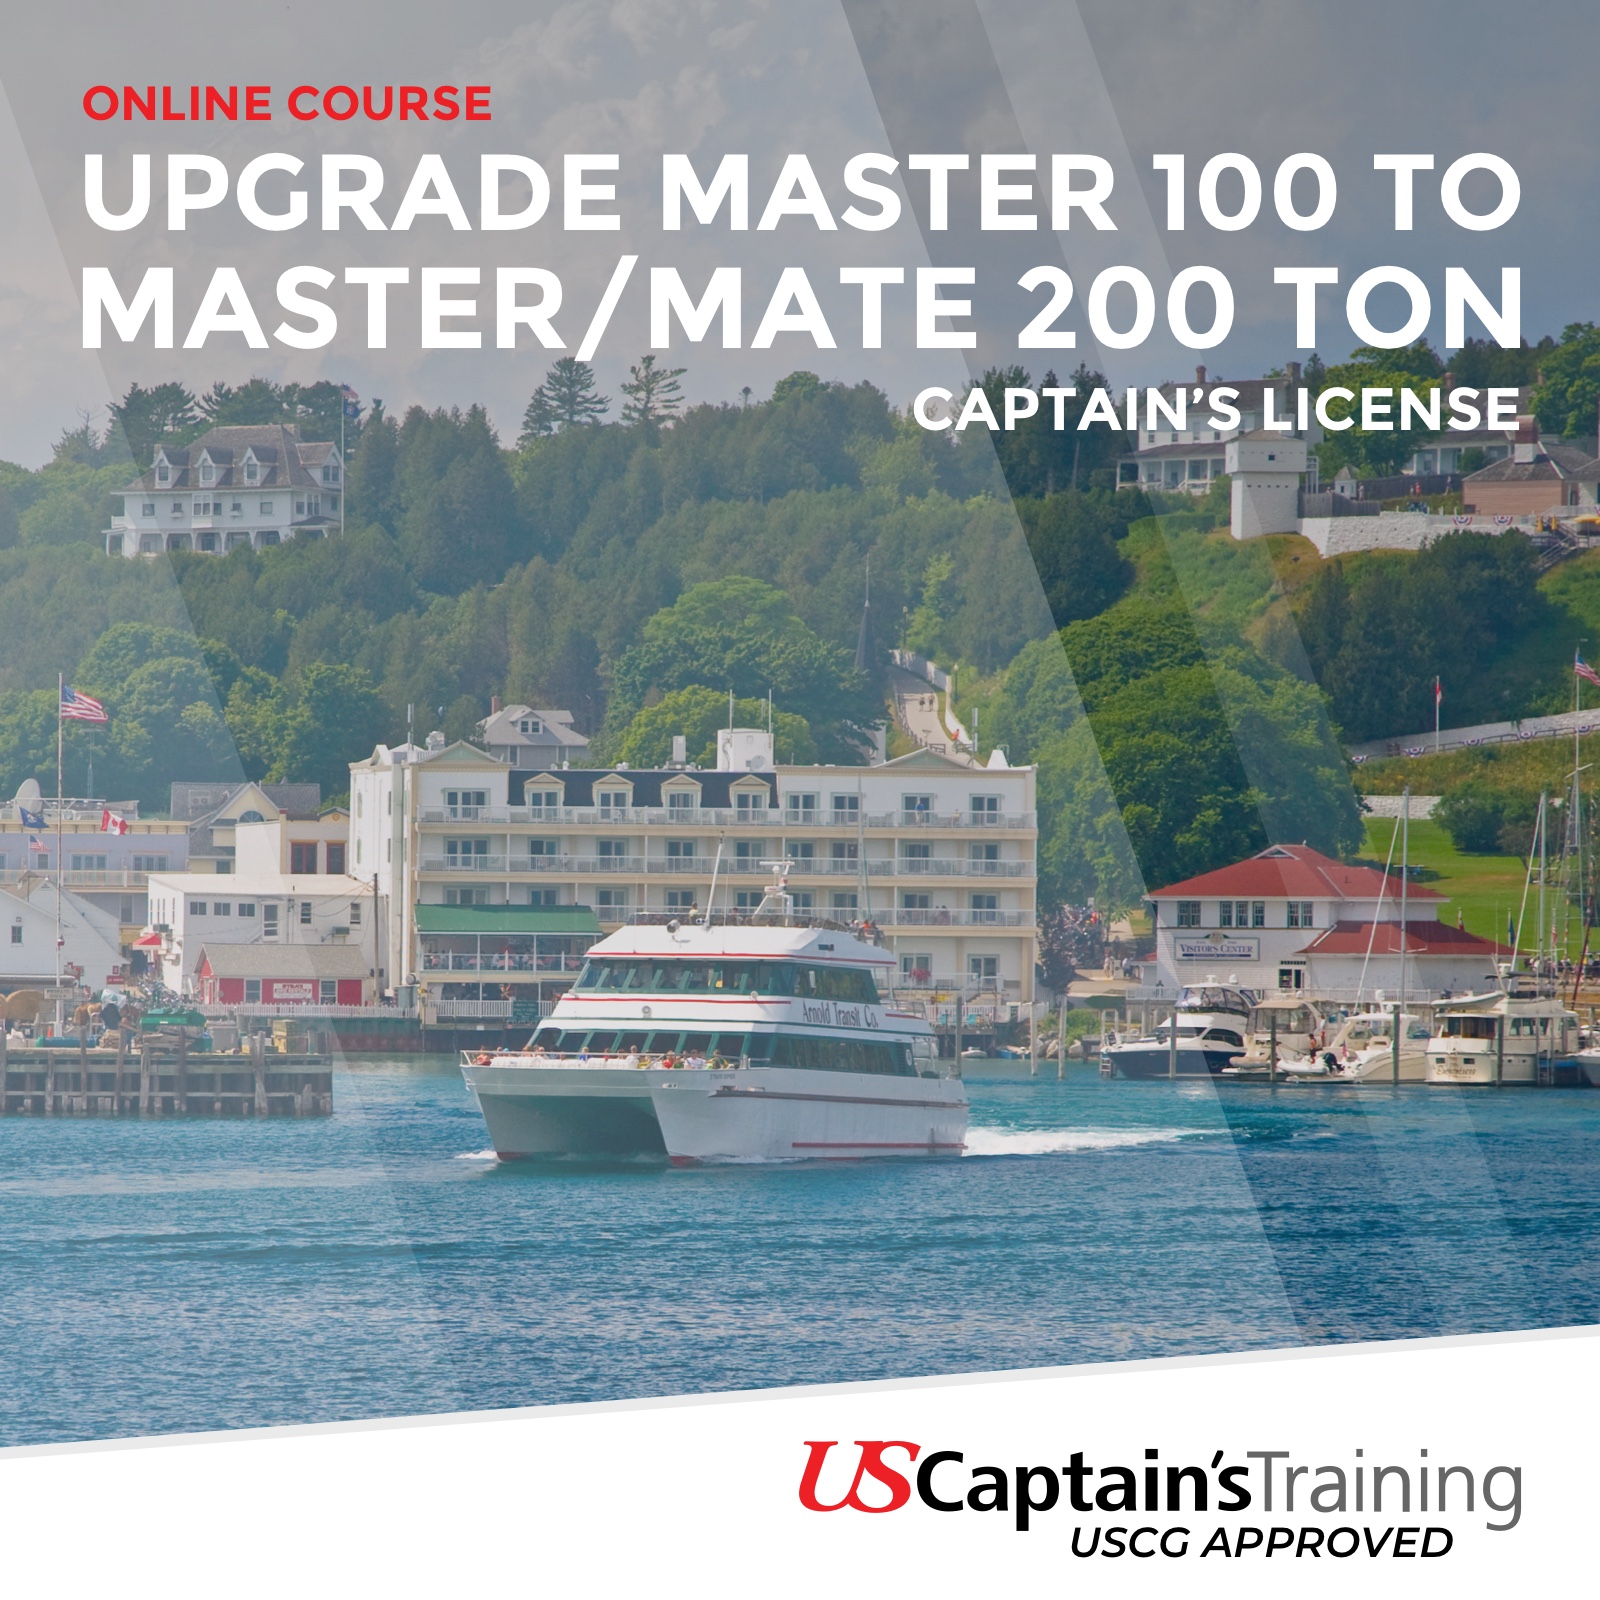 Captain's License Online Course & Exam from US Captain's Training - Upgrade Master 100 to Master/Mate 200 Ton